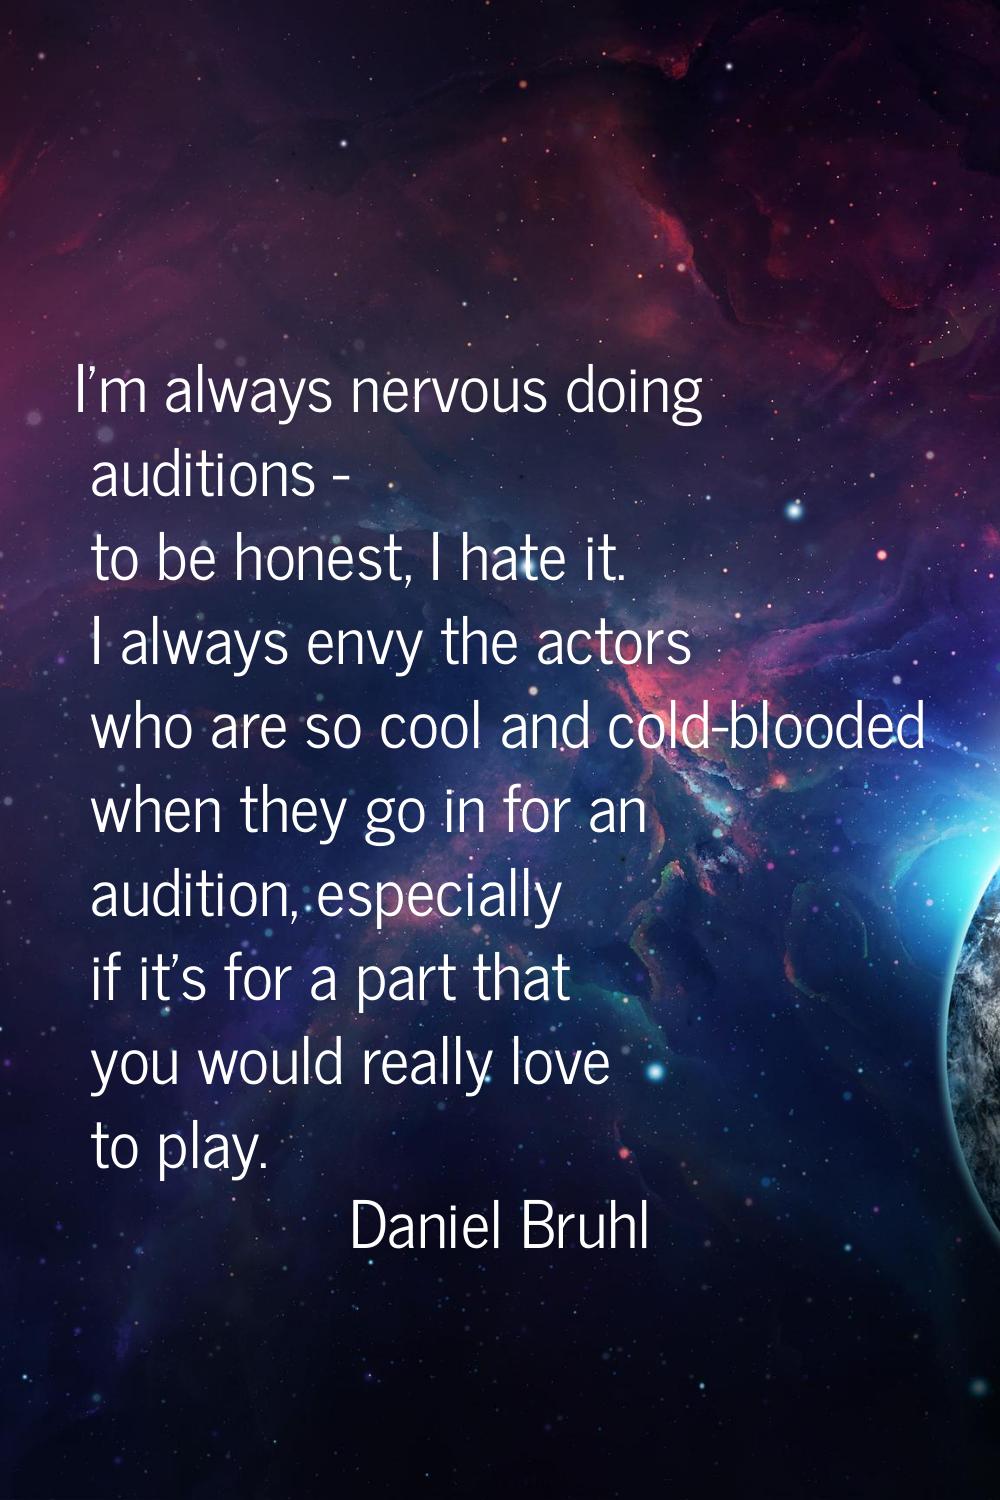 I'm always nervous doing auditions - to be honest, I hate it. I always envy the actors who are so c